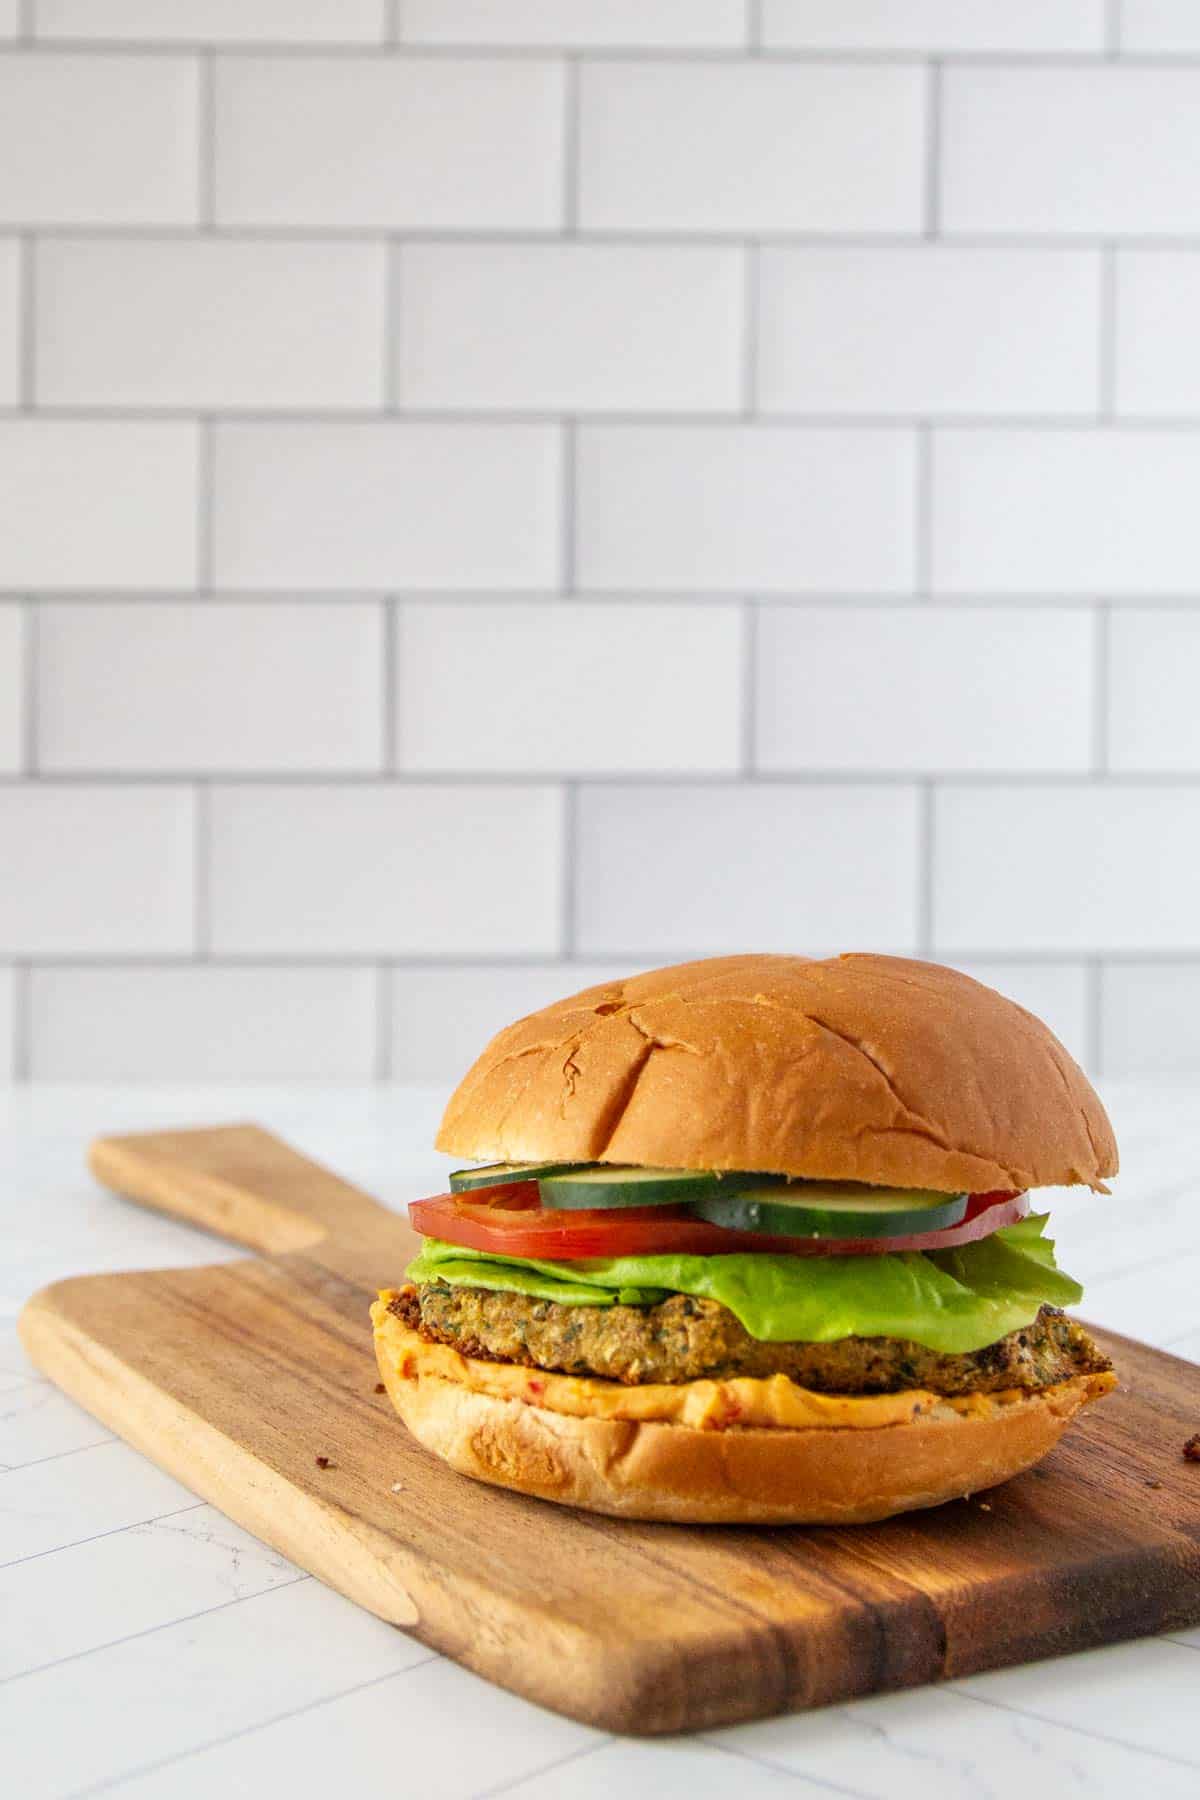 A veggie burger with lettuce, tomato, and a thick patty on a wooden cutting board against a white subway tile background.